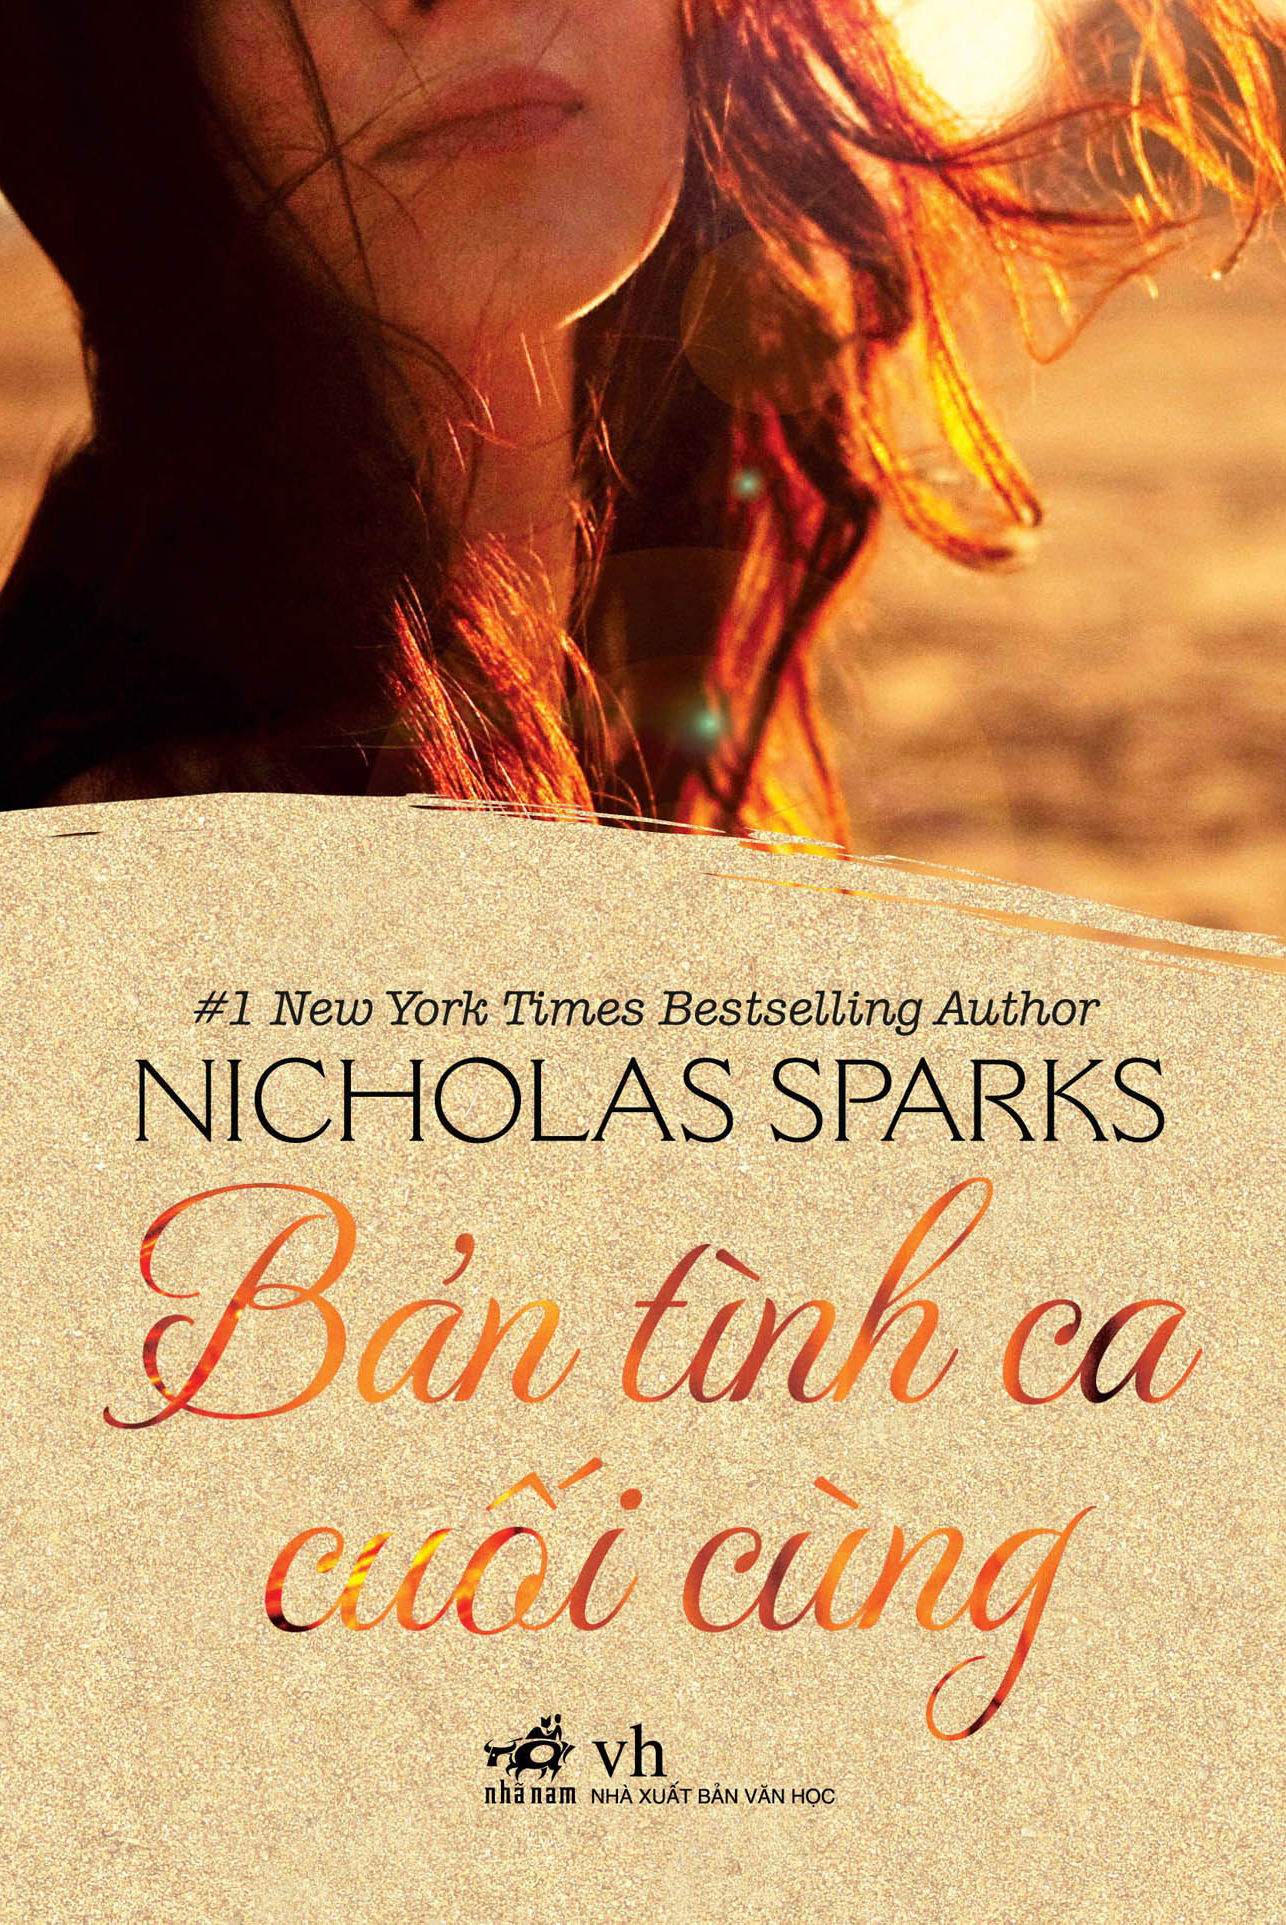 Nicholas Sparks The Last Song